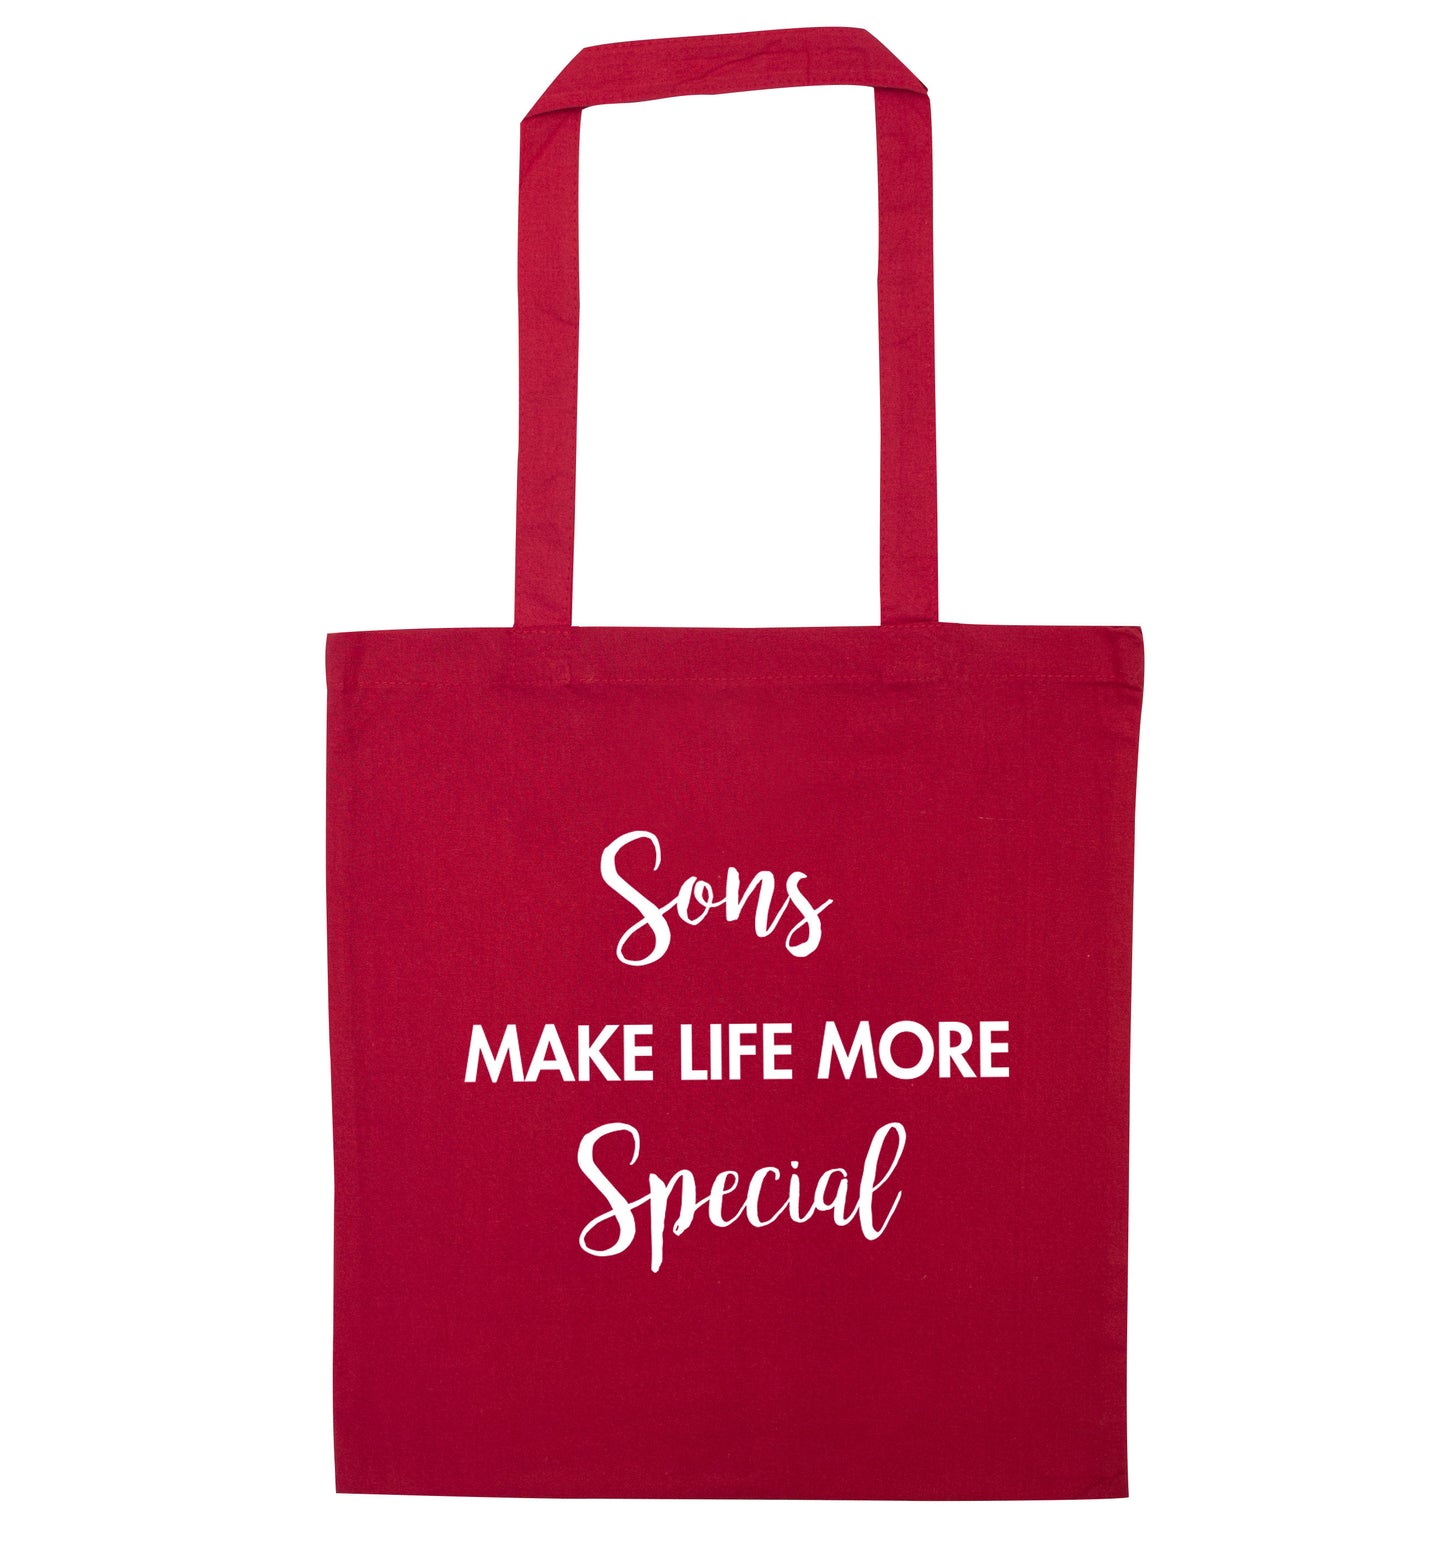 Sons make life more special red tote bag